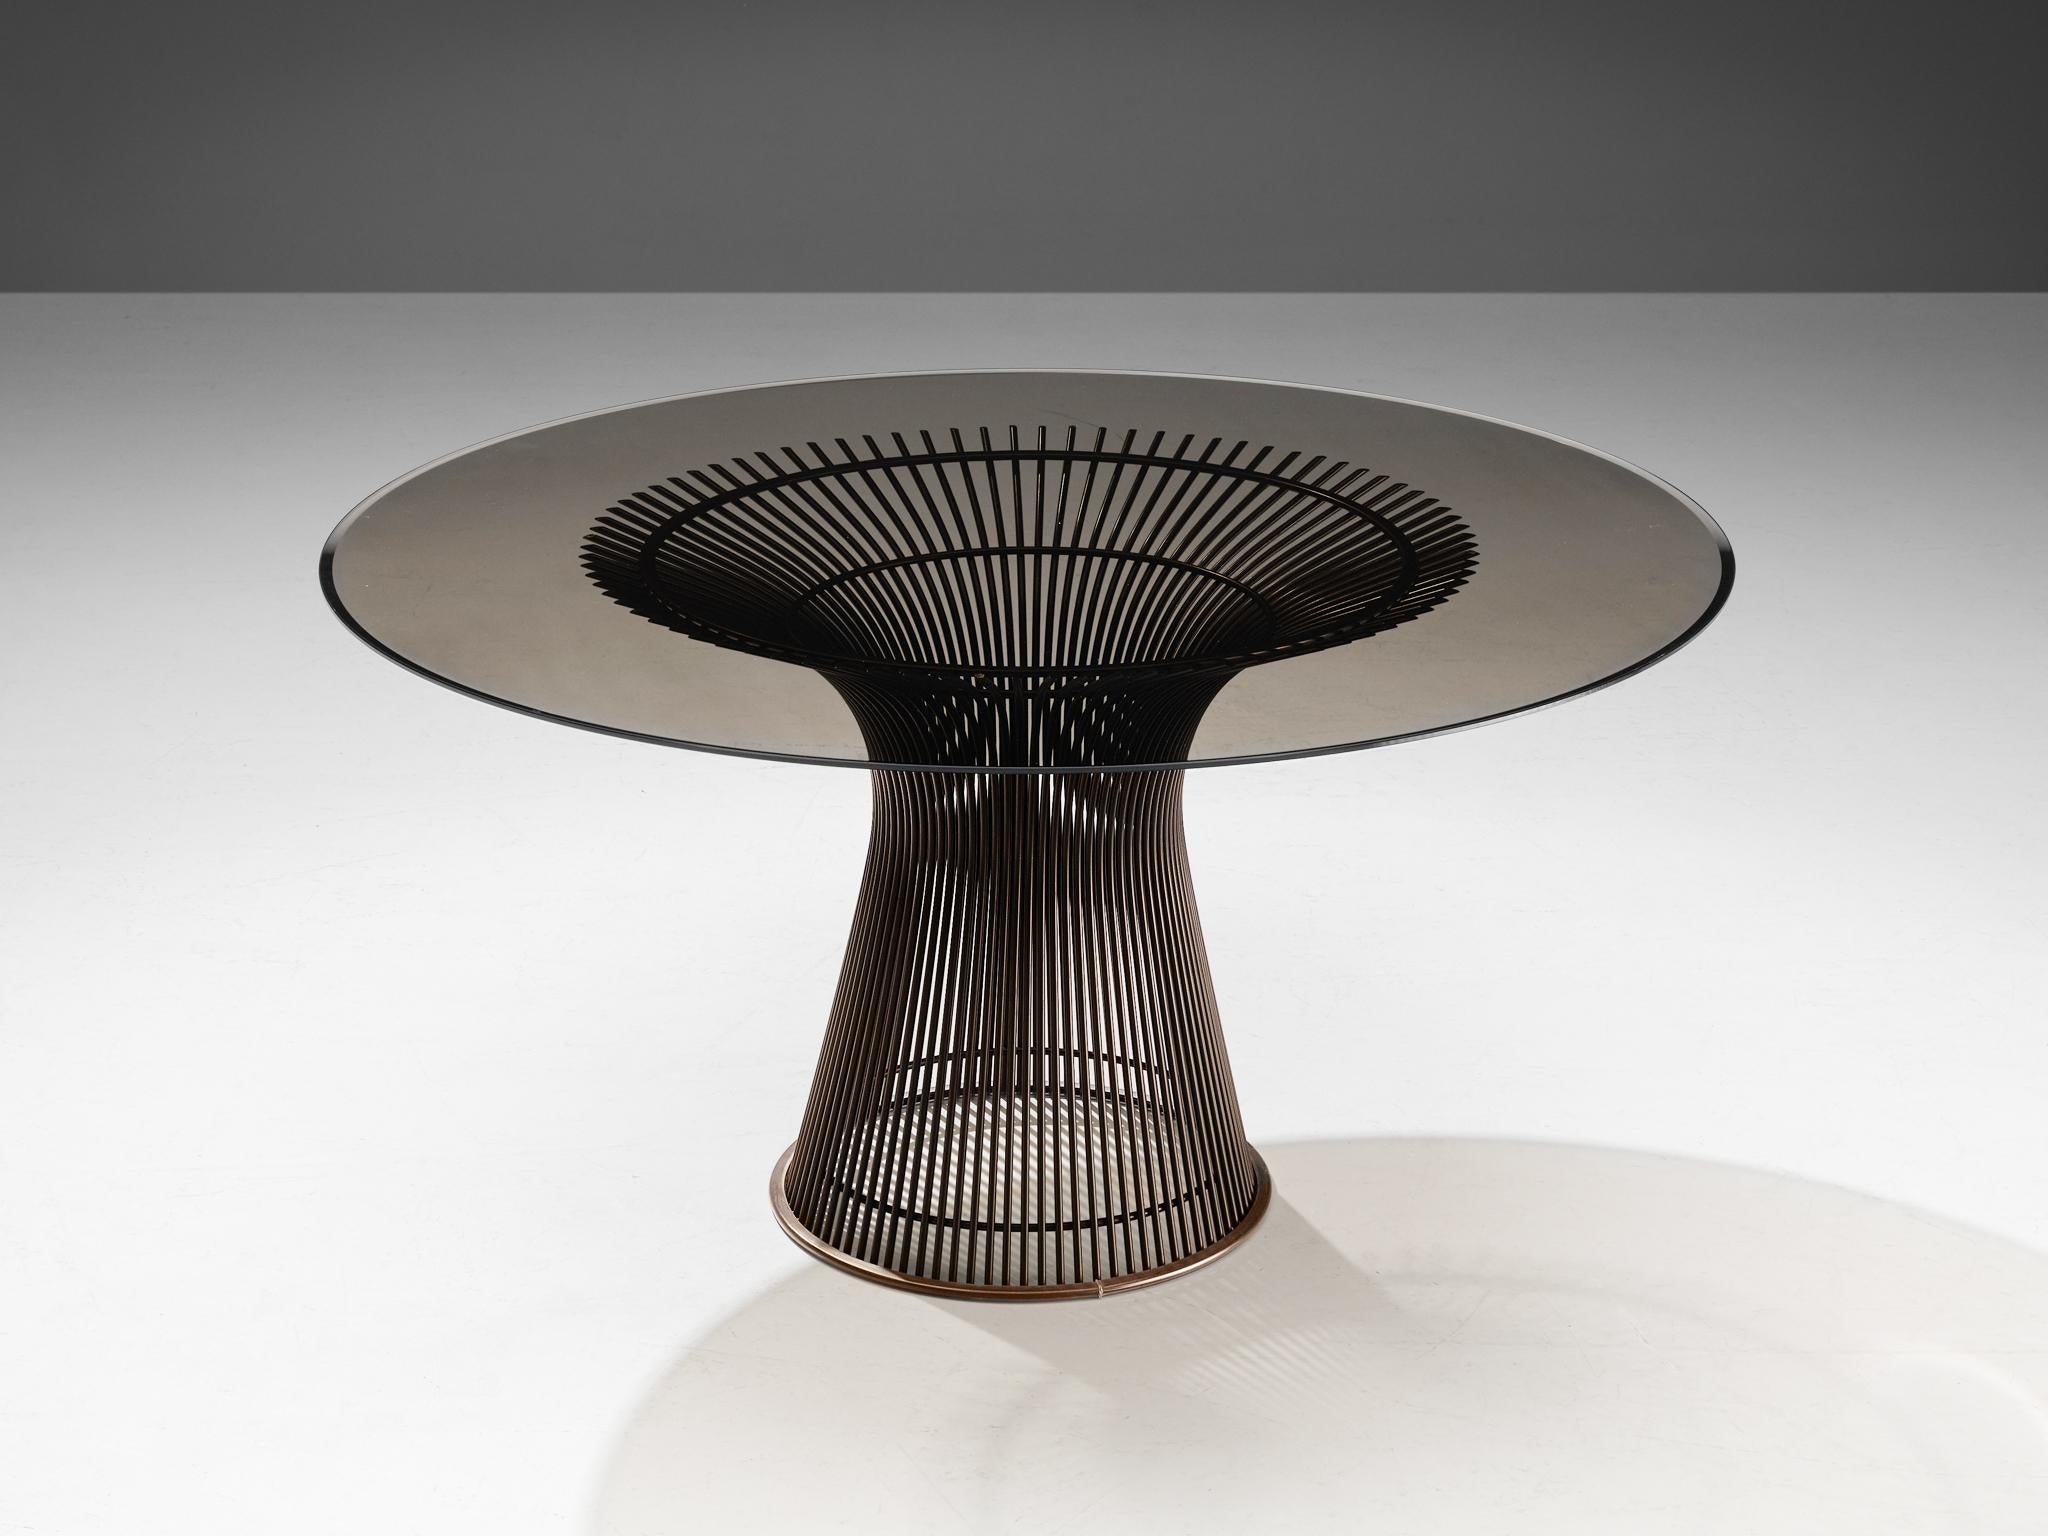 Warren Platner for Knoll, table, glass, steel, United States, design ca. 1962  

This iconic center table by Warren Platner (1919-2006) is created by welding curved steel rods to circular and semi-circular frames, simultaneously serving as structure